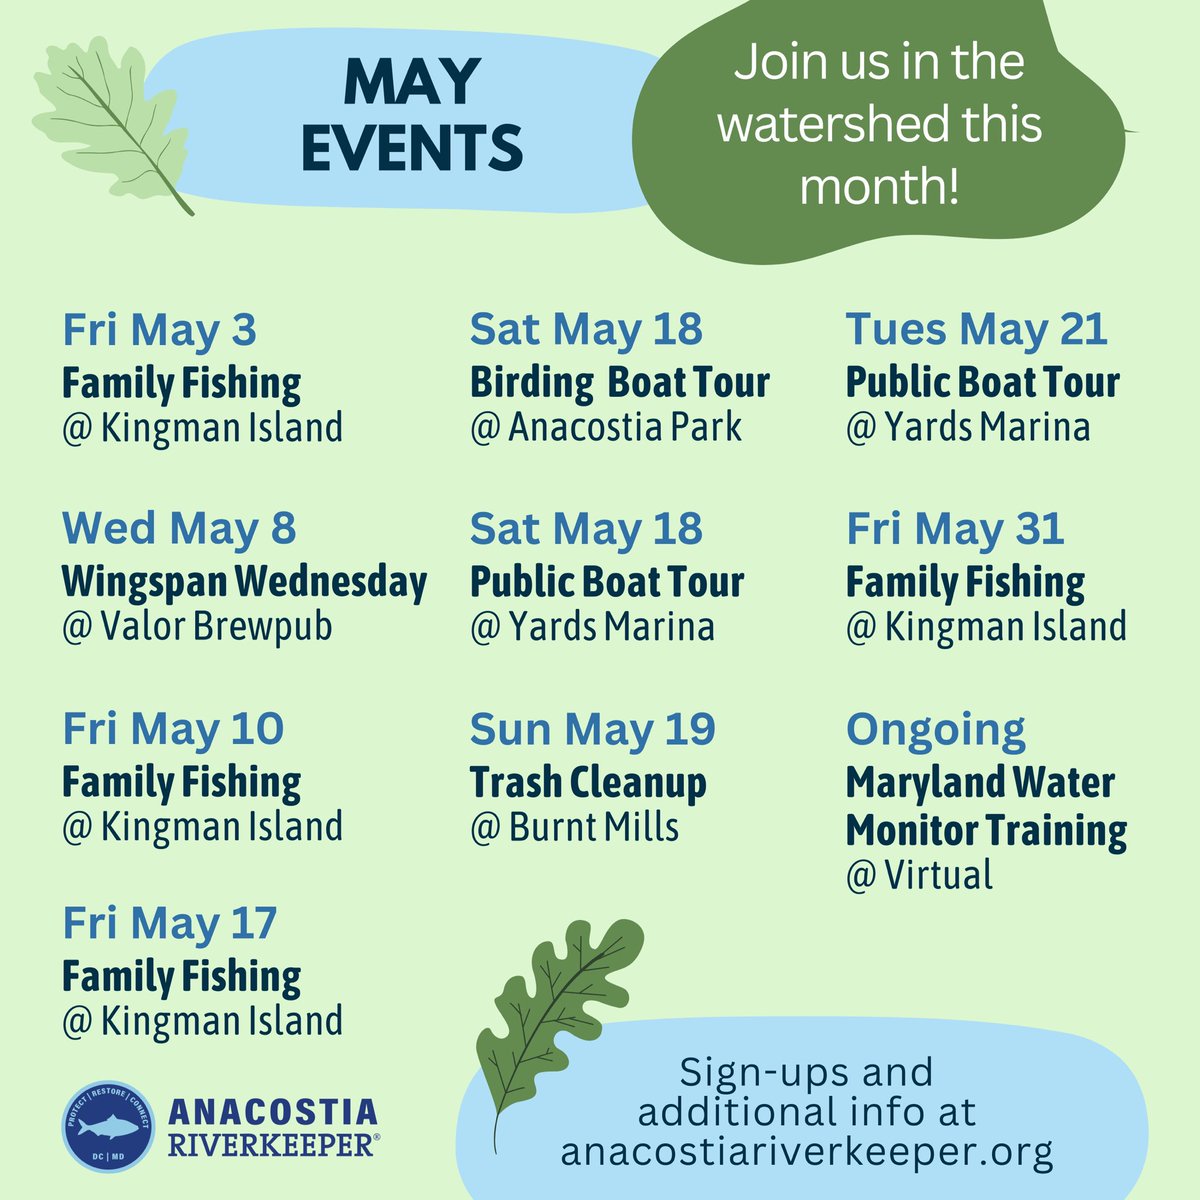 Mark your calendar! 📍 🗓️ 📍 We are hosting many fun events in the watershed this month including fishing at Kingman Island, free boat tours, and trash cleanups! Learn more and sign up: anacostiariverkeeper.org/events-calenda…